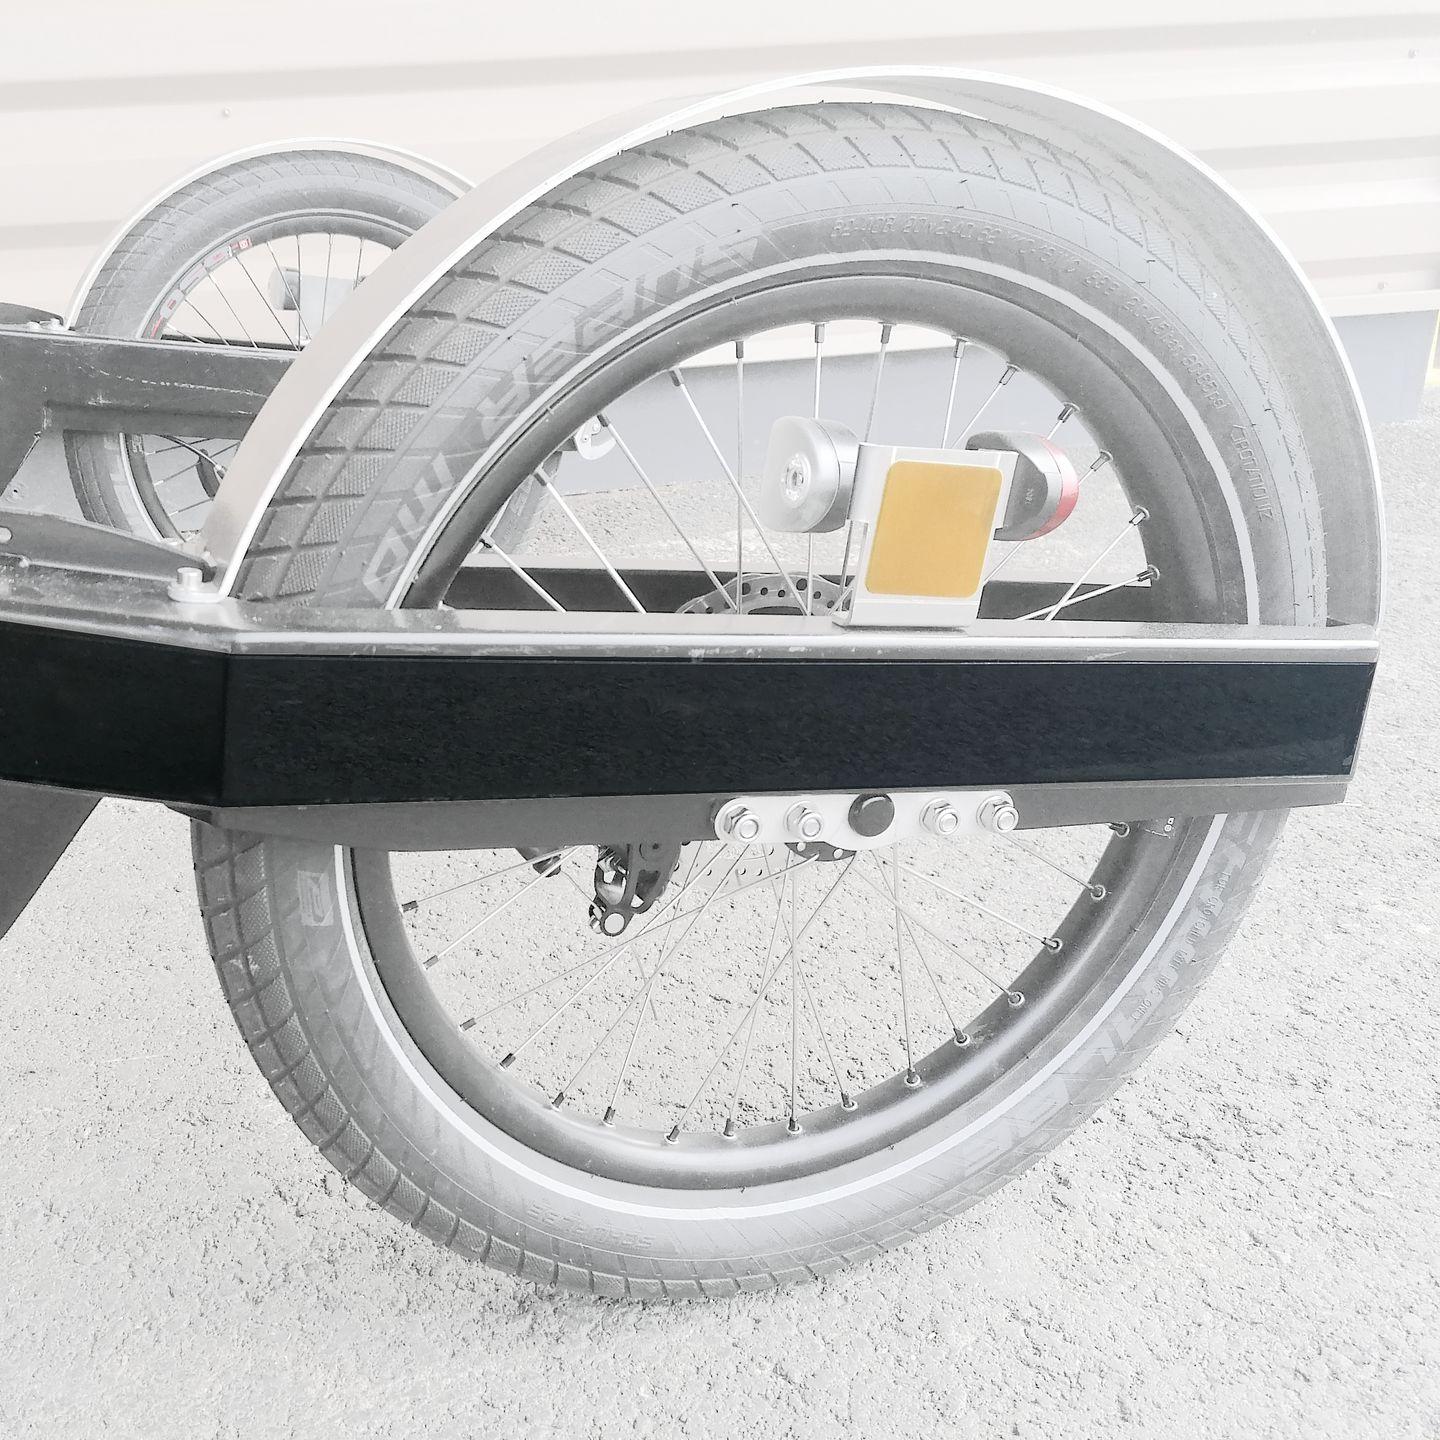 Protective bands on the BicyLift bike trailer next to its wheel